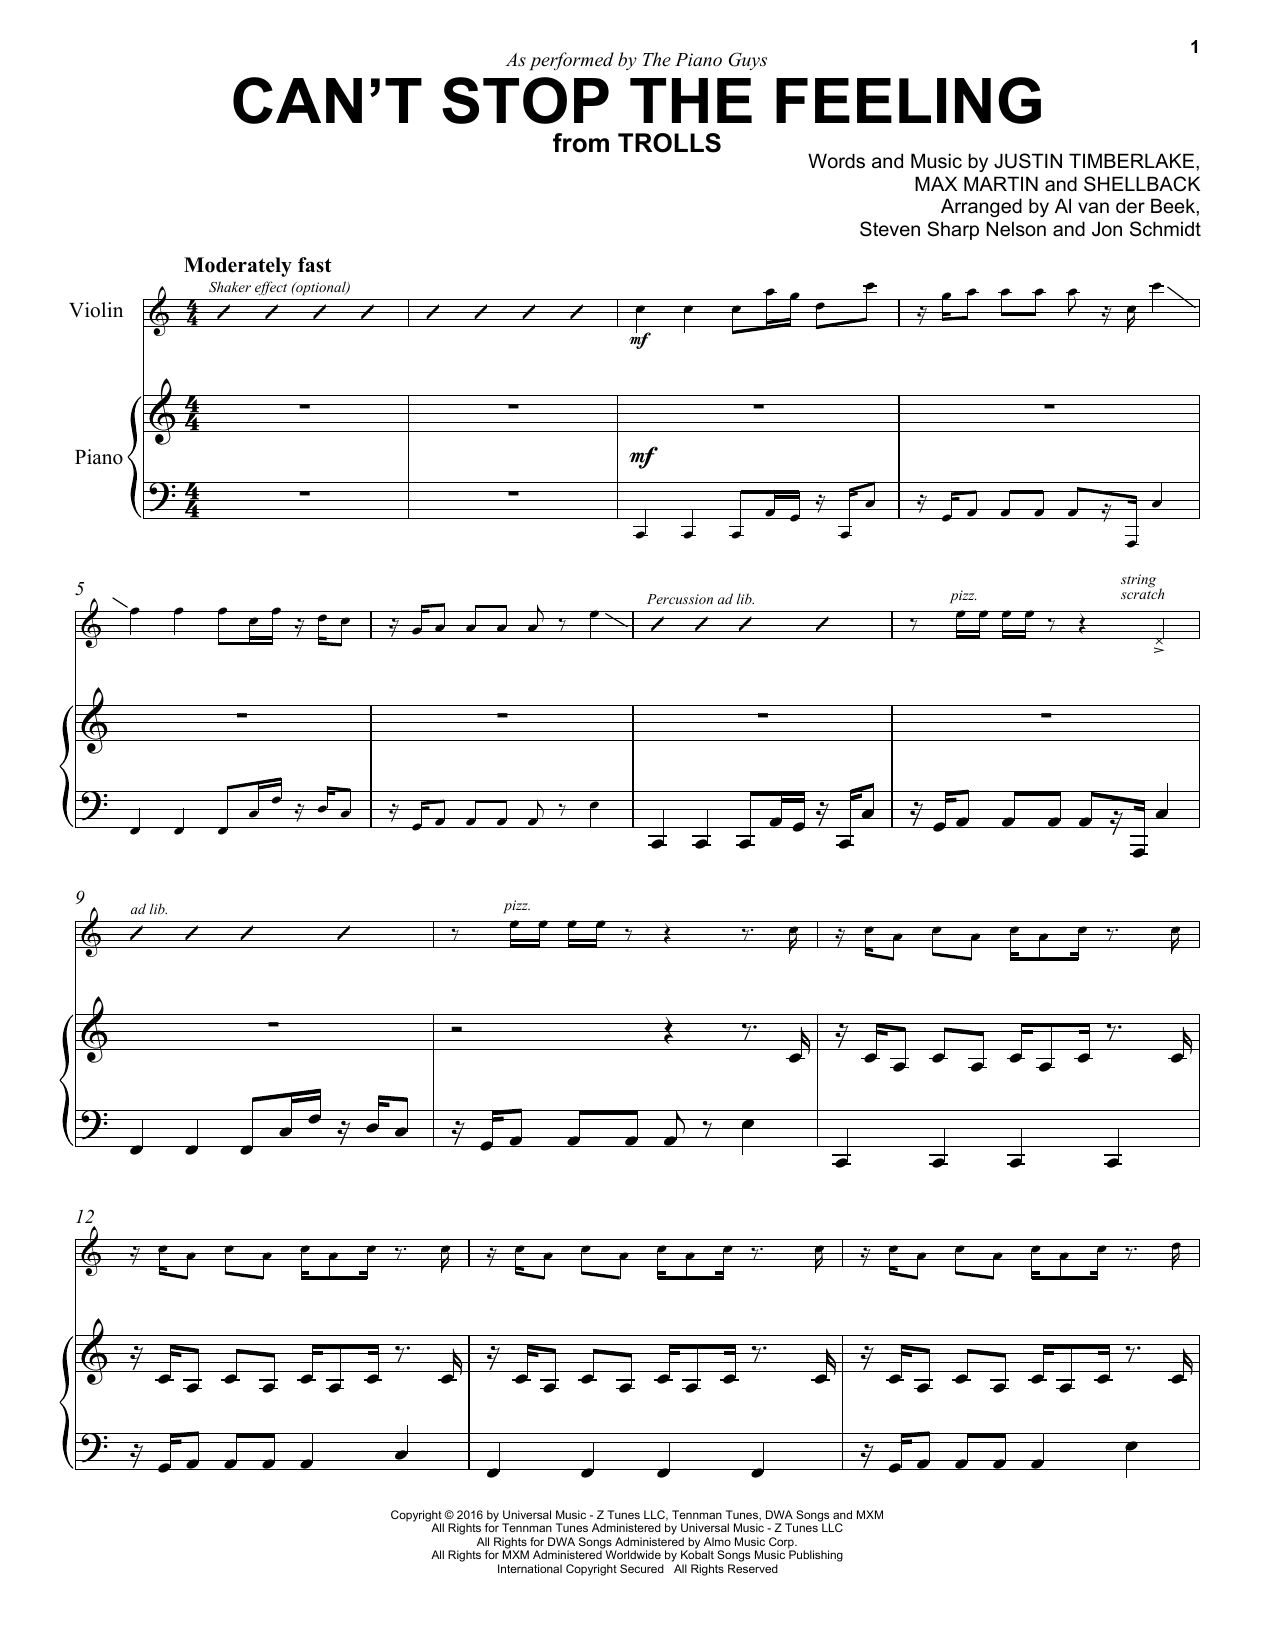 Download The Piano Guys Can't Stop The Feeling Sheet Music